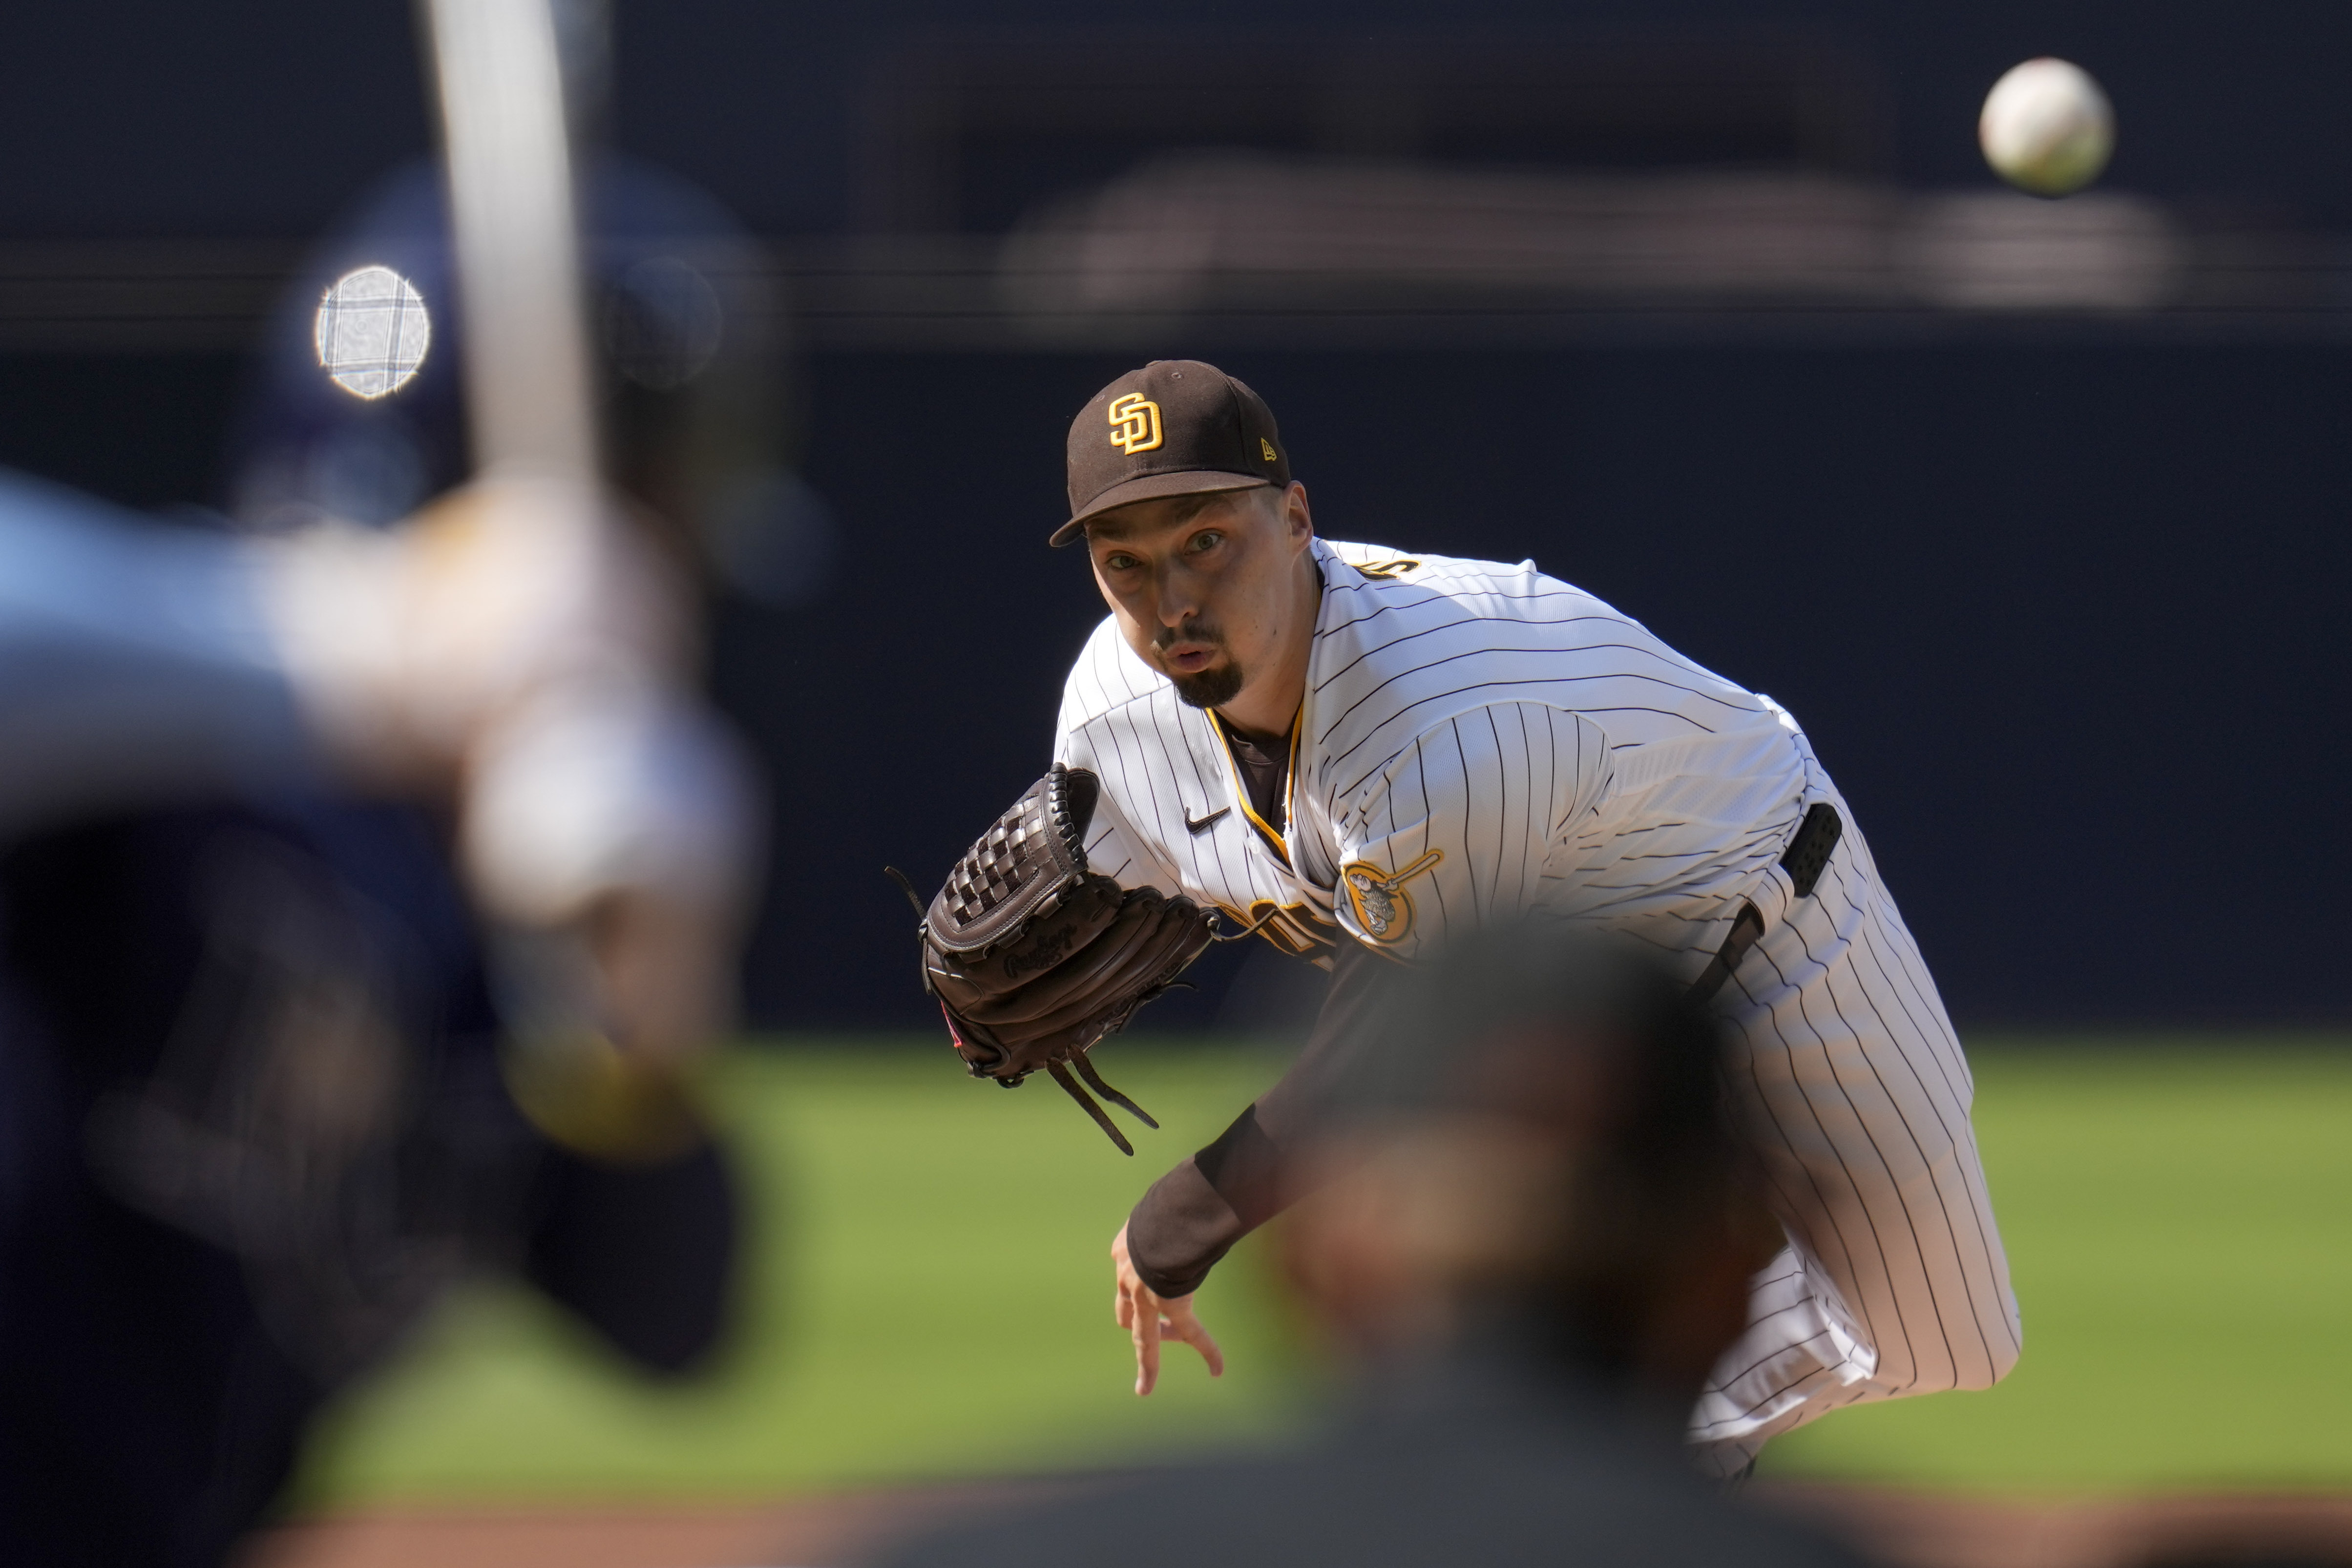 Padres' bunt derby backs dominant Blake Snell in 2-0 win against